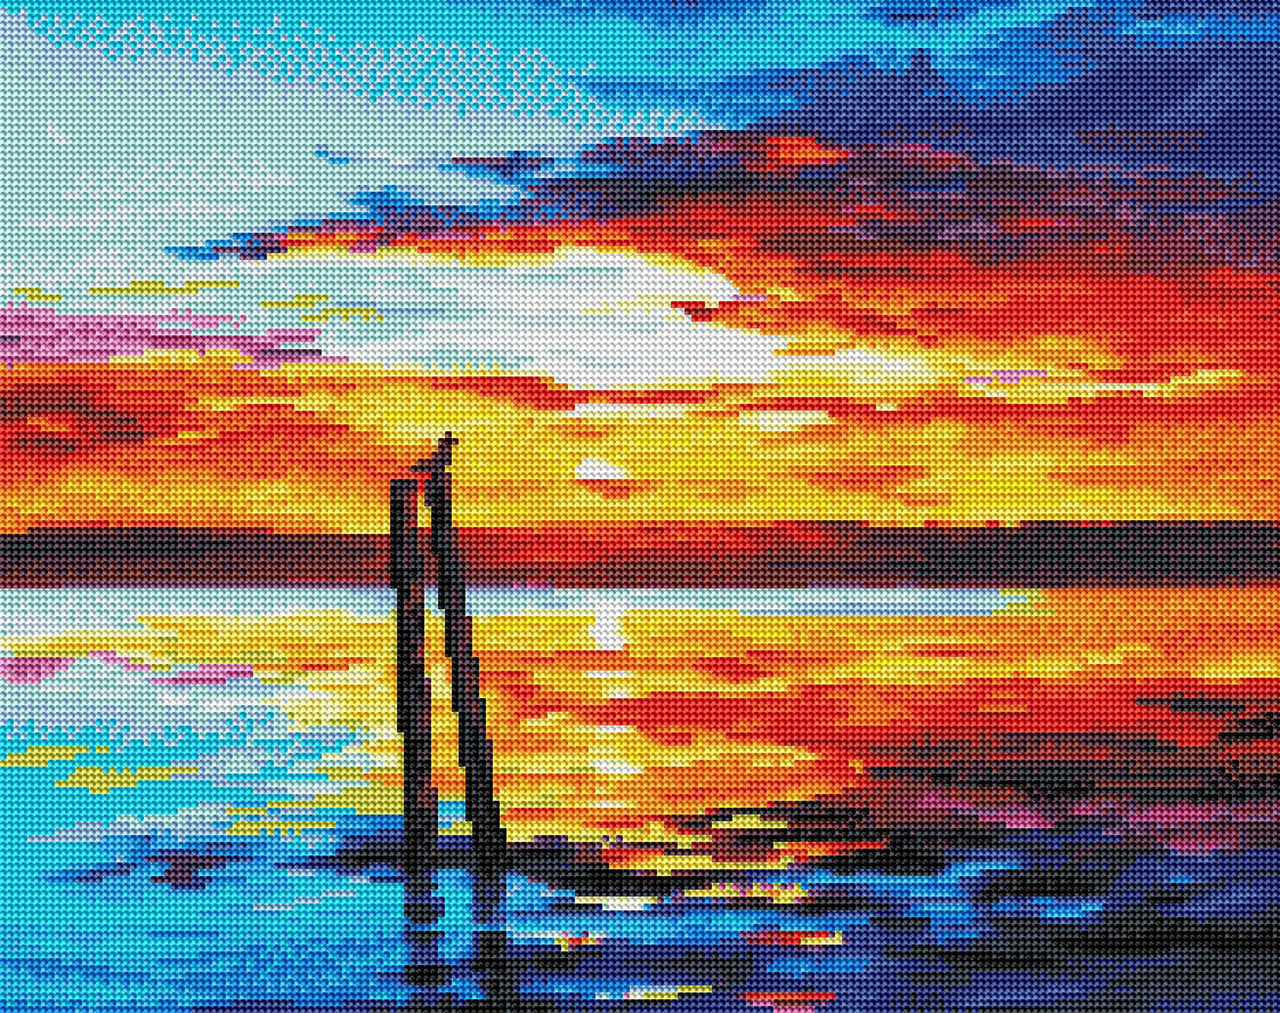 Diamond Painting Swansea Sunset 16.5" x 20.9" (42cm x 53cm) / Round With 38 Colors Including 2 ABs / 27,676